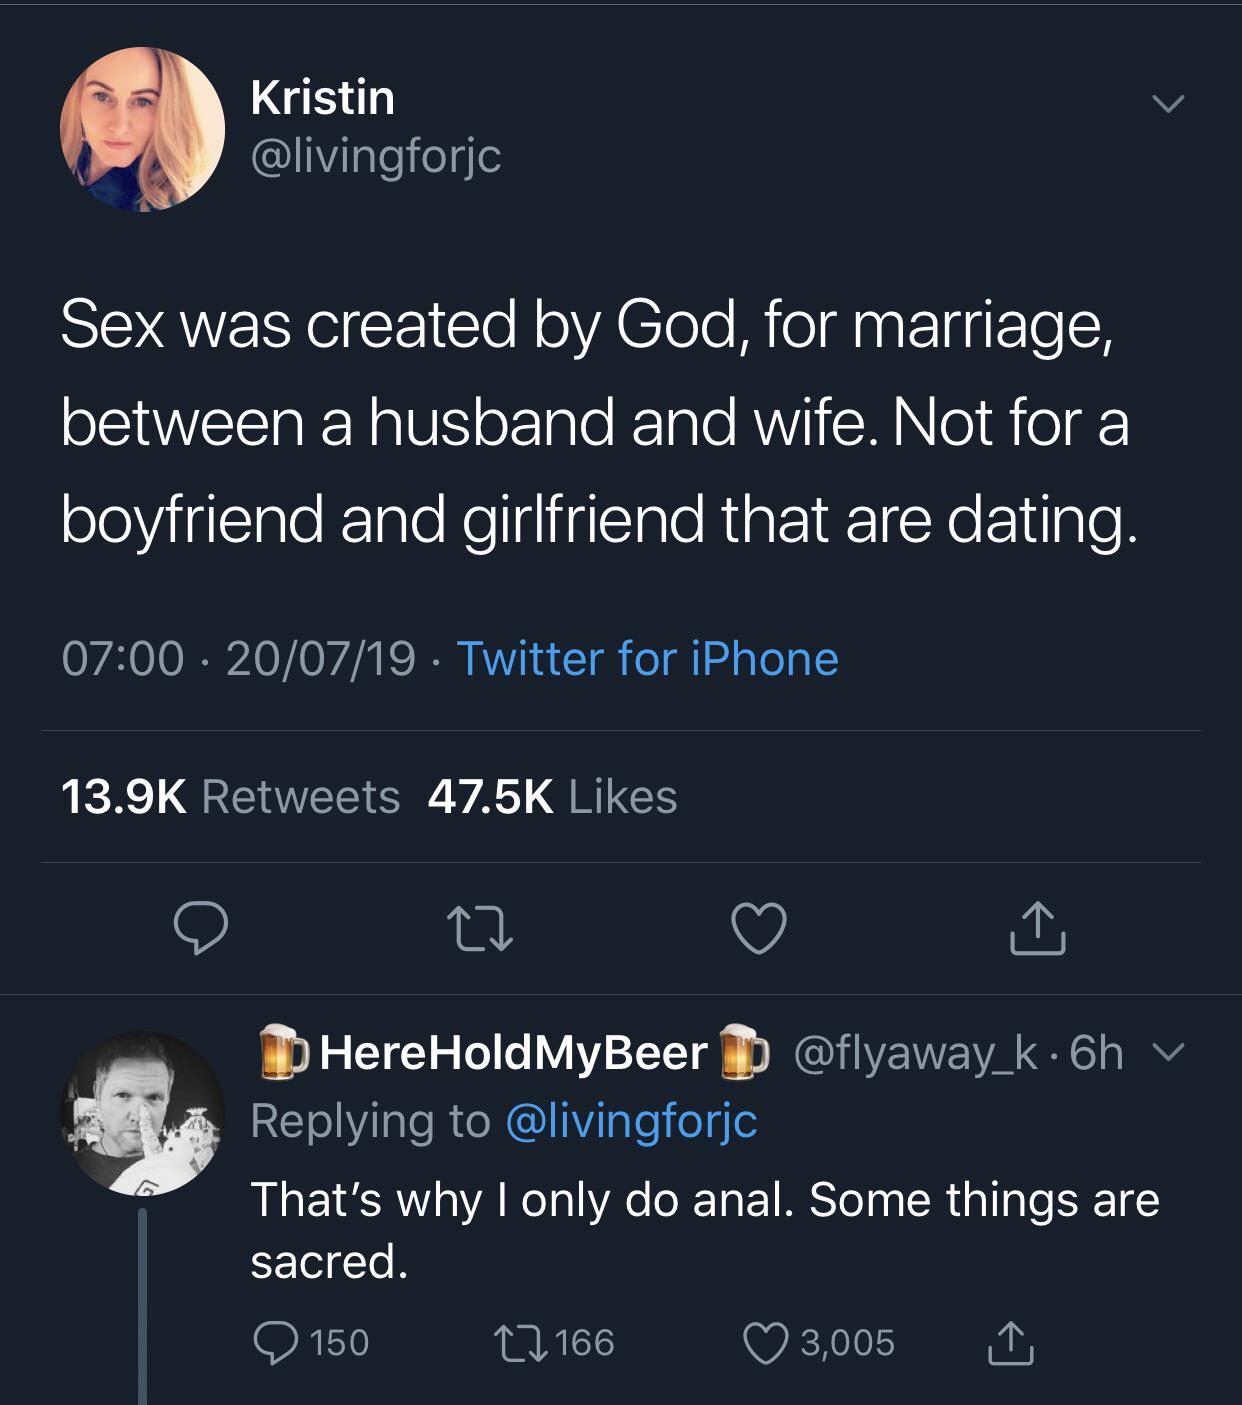 Kristin Kristin Sex was created by God, for marriage, between a husband and wife. Not for a boyfriend and girlfriend that are dating. HereHold MyBeer That's why I only do anal. Some things are sacred.